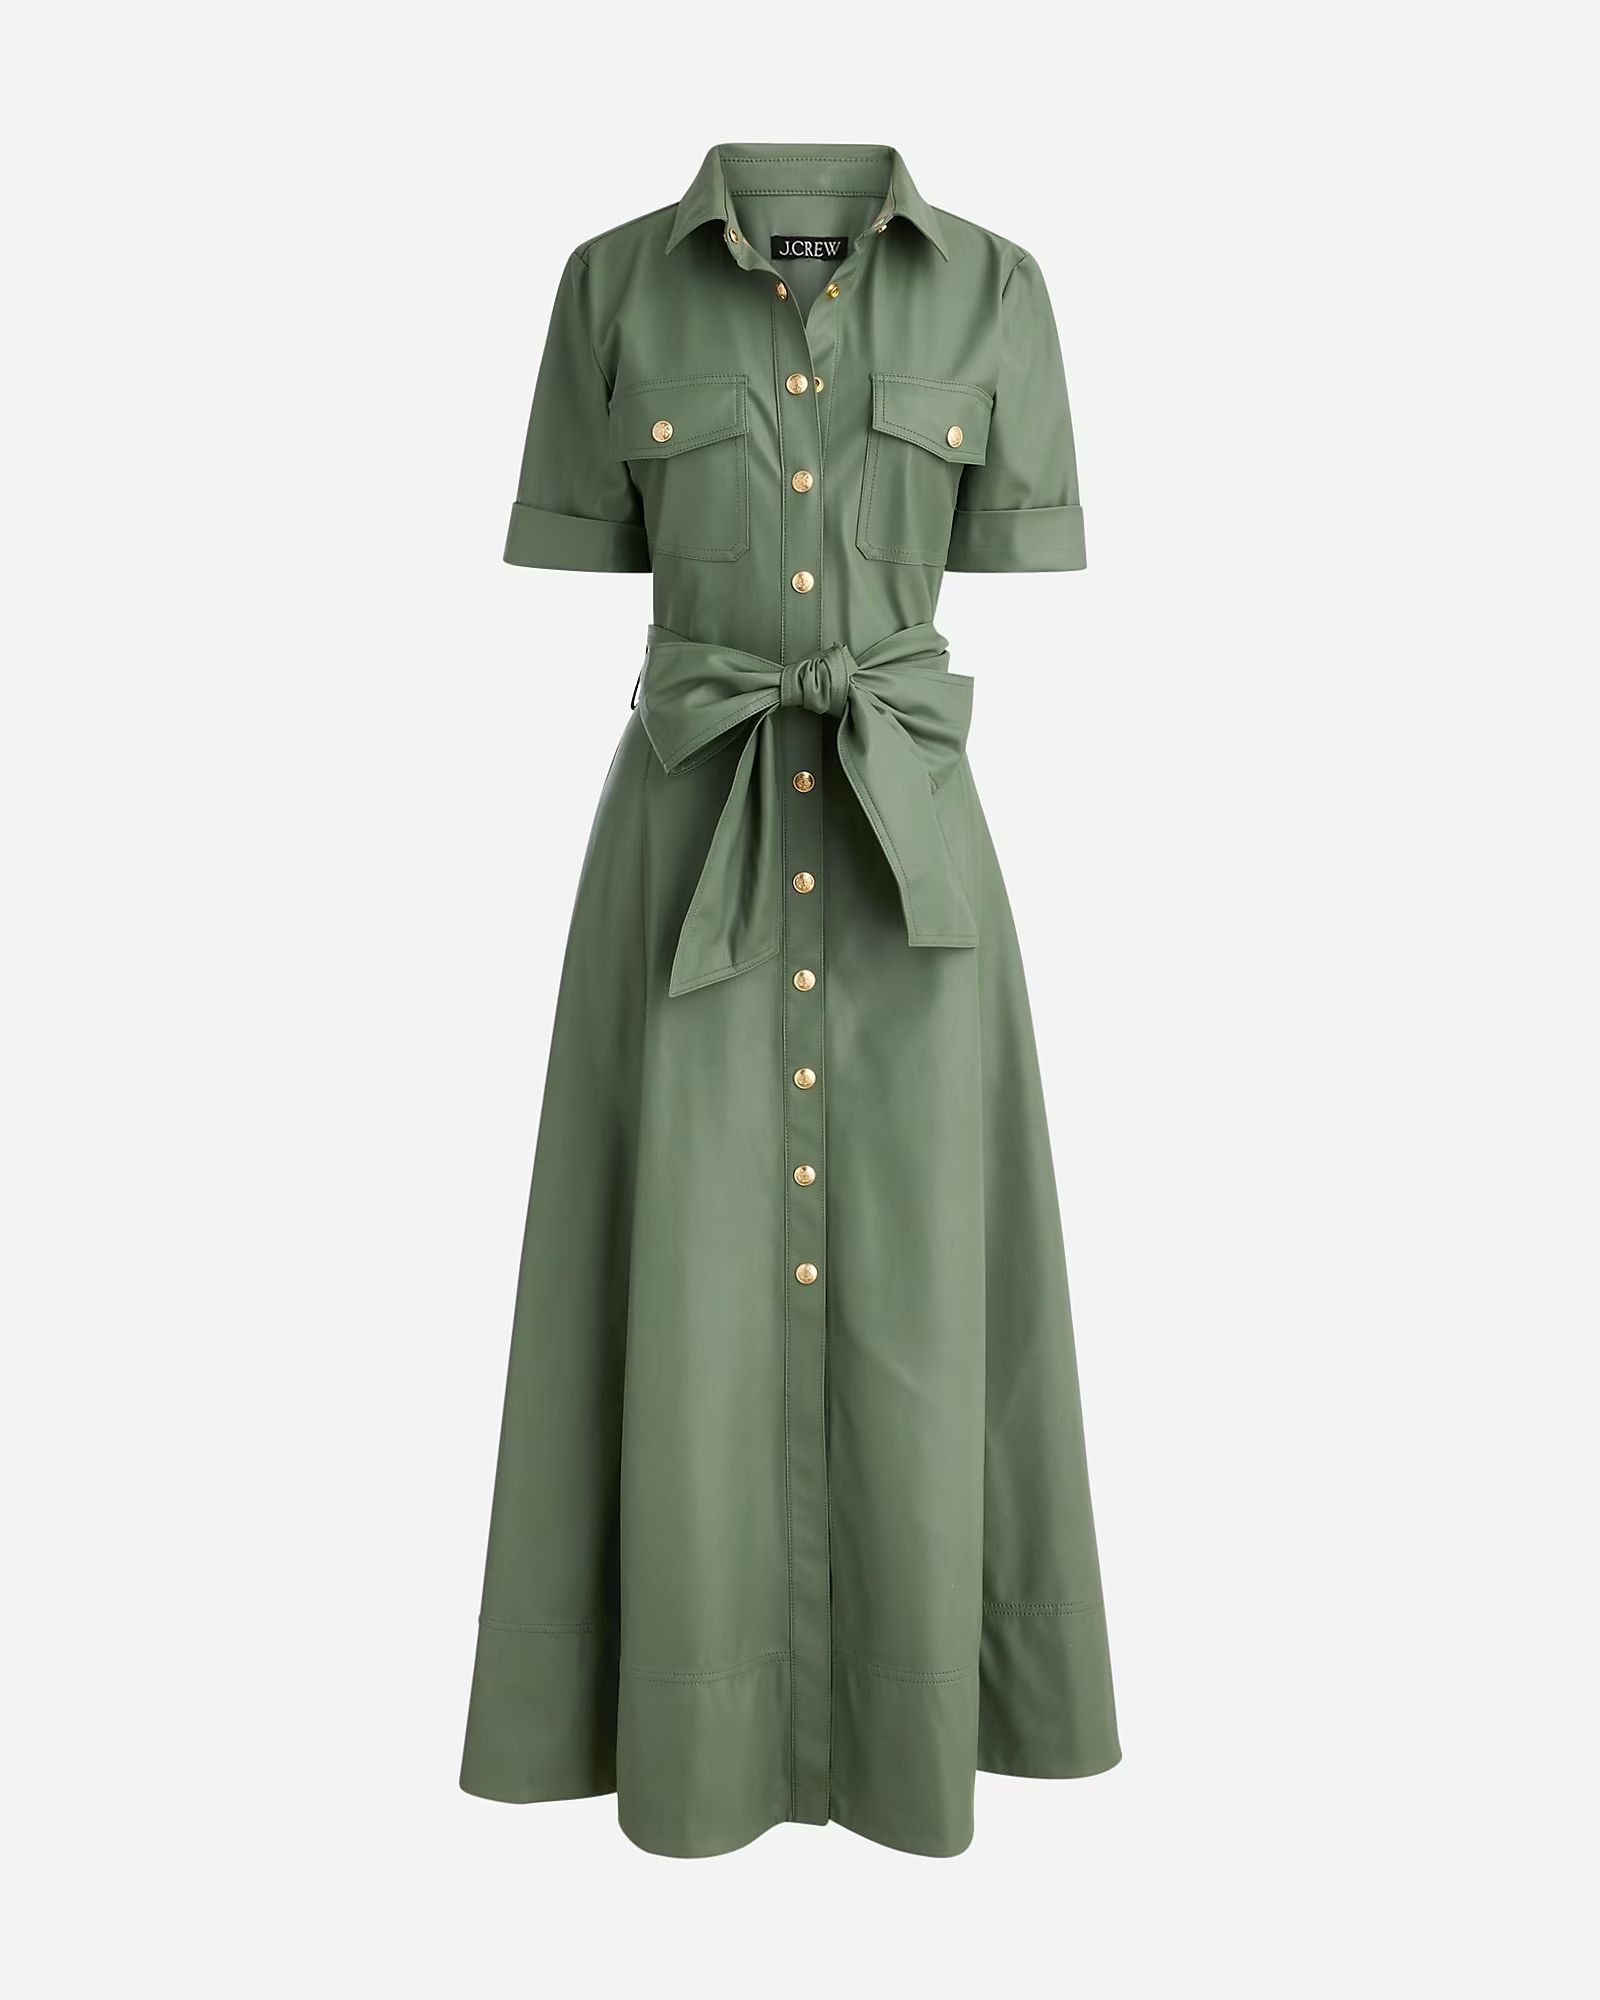 top ratedCollection tie-waist shirtdress in faux leather$174.50$298.00 (41% Off)Dress Event. 40% ... | J.Crew US